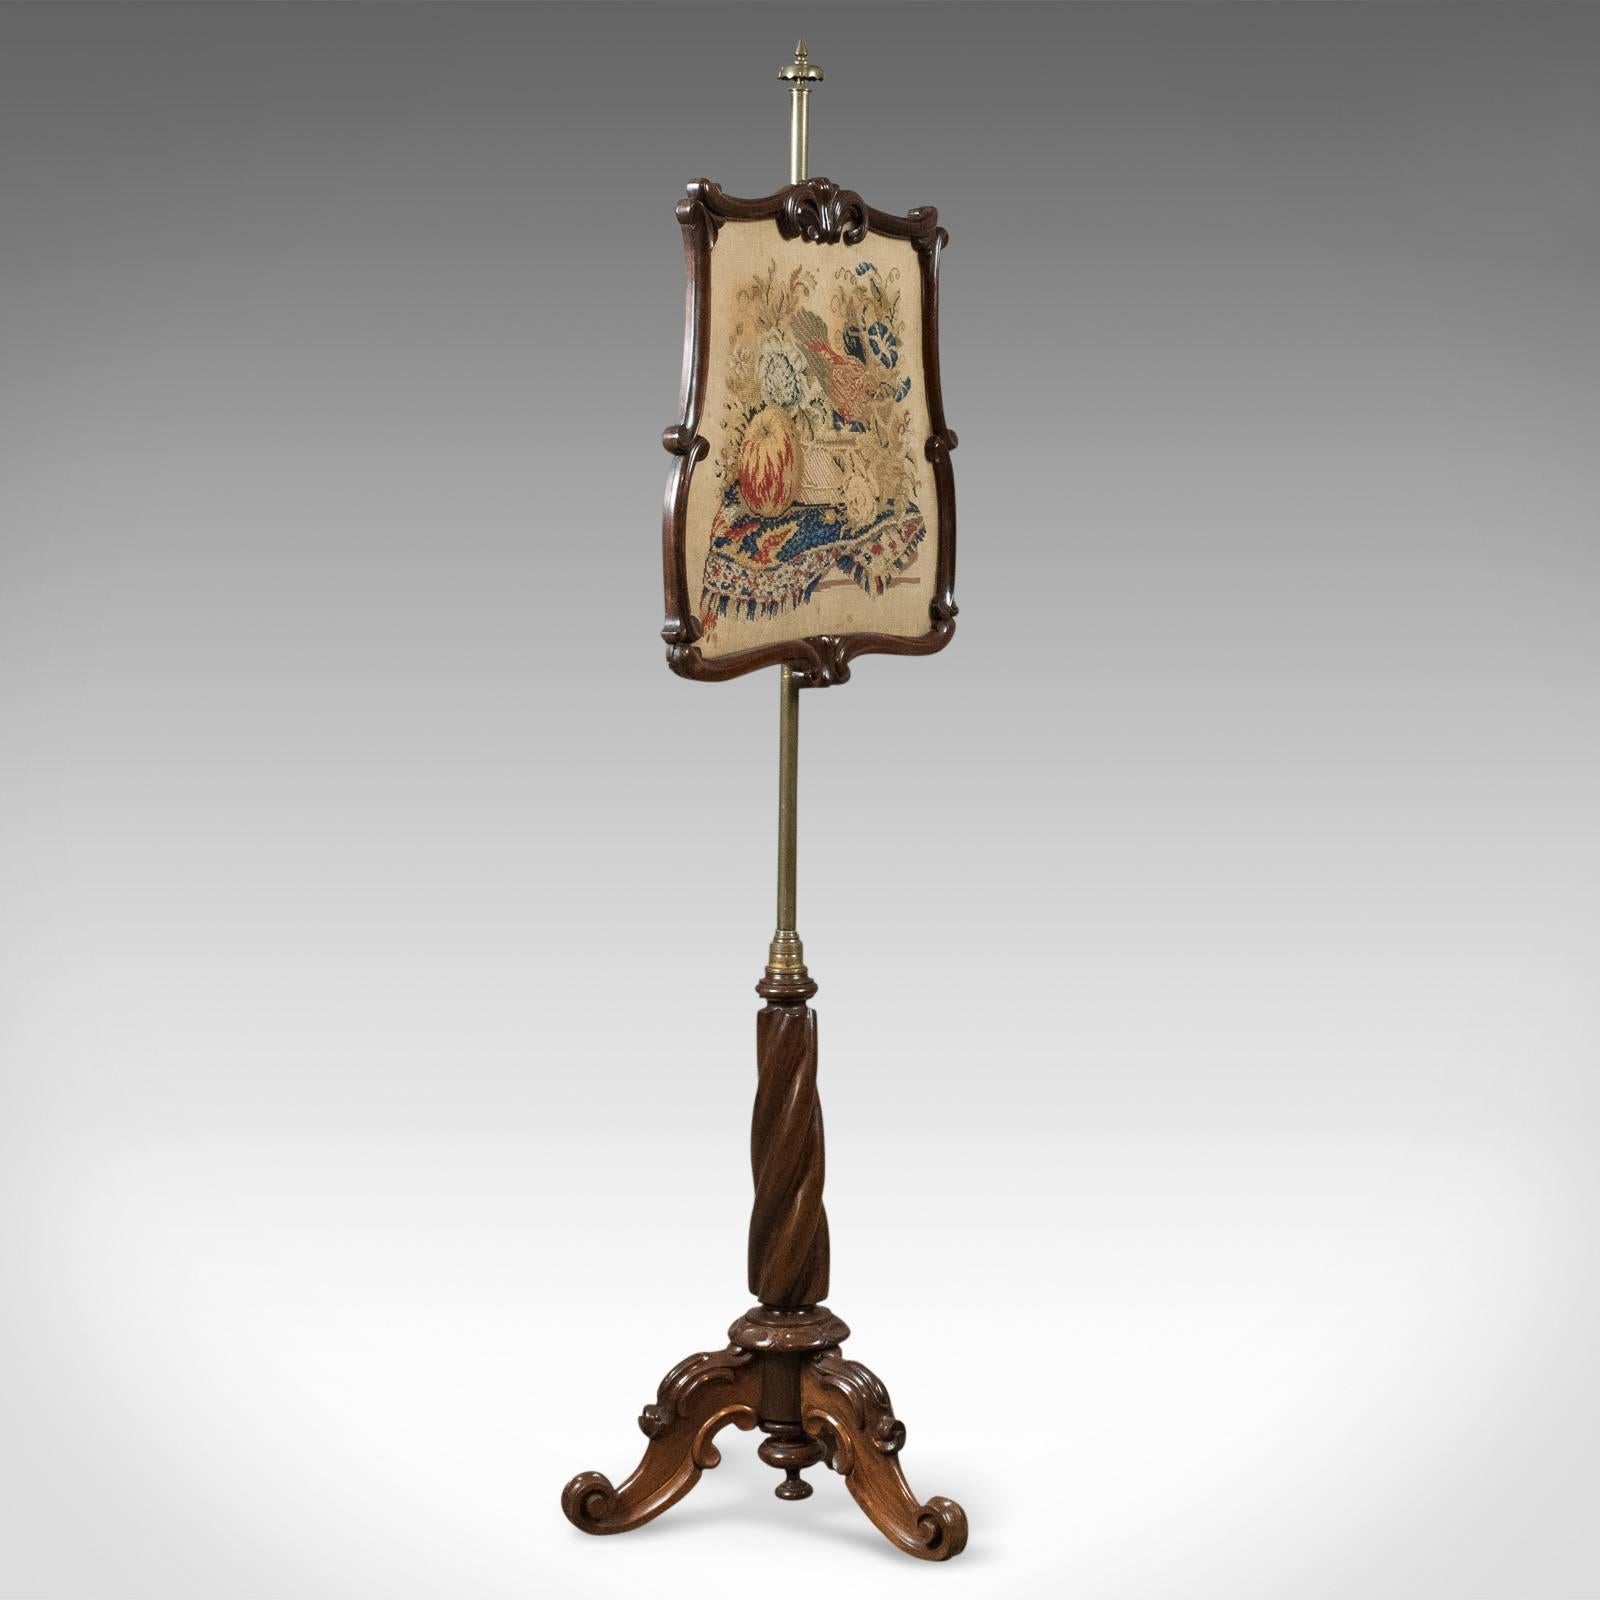 This is an antique pole screen, early Victorian fire screen, circa 1840.

Raised on a robust rosewood Stand with good colour and grain interest
A tripod of beautifully carved cabriole legs featuring C' scrolls, carved knees and scrolled toes
An